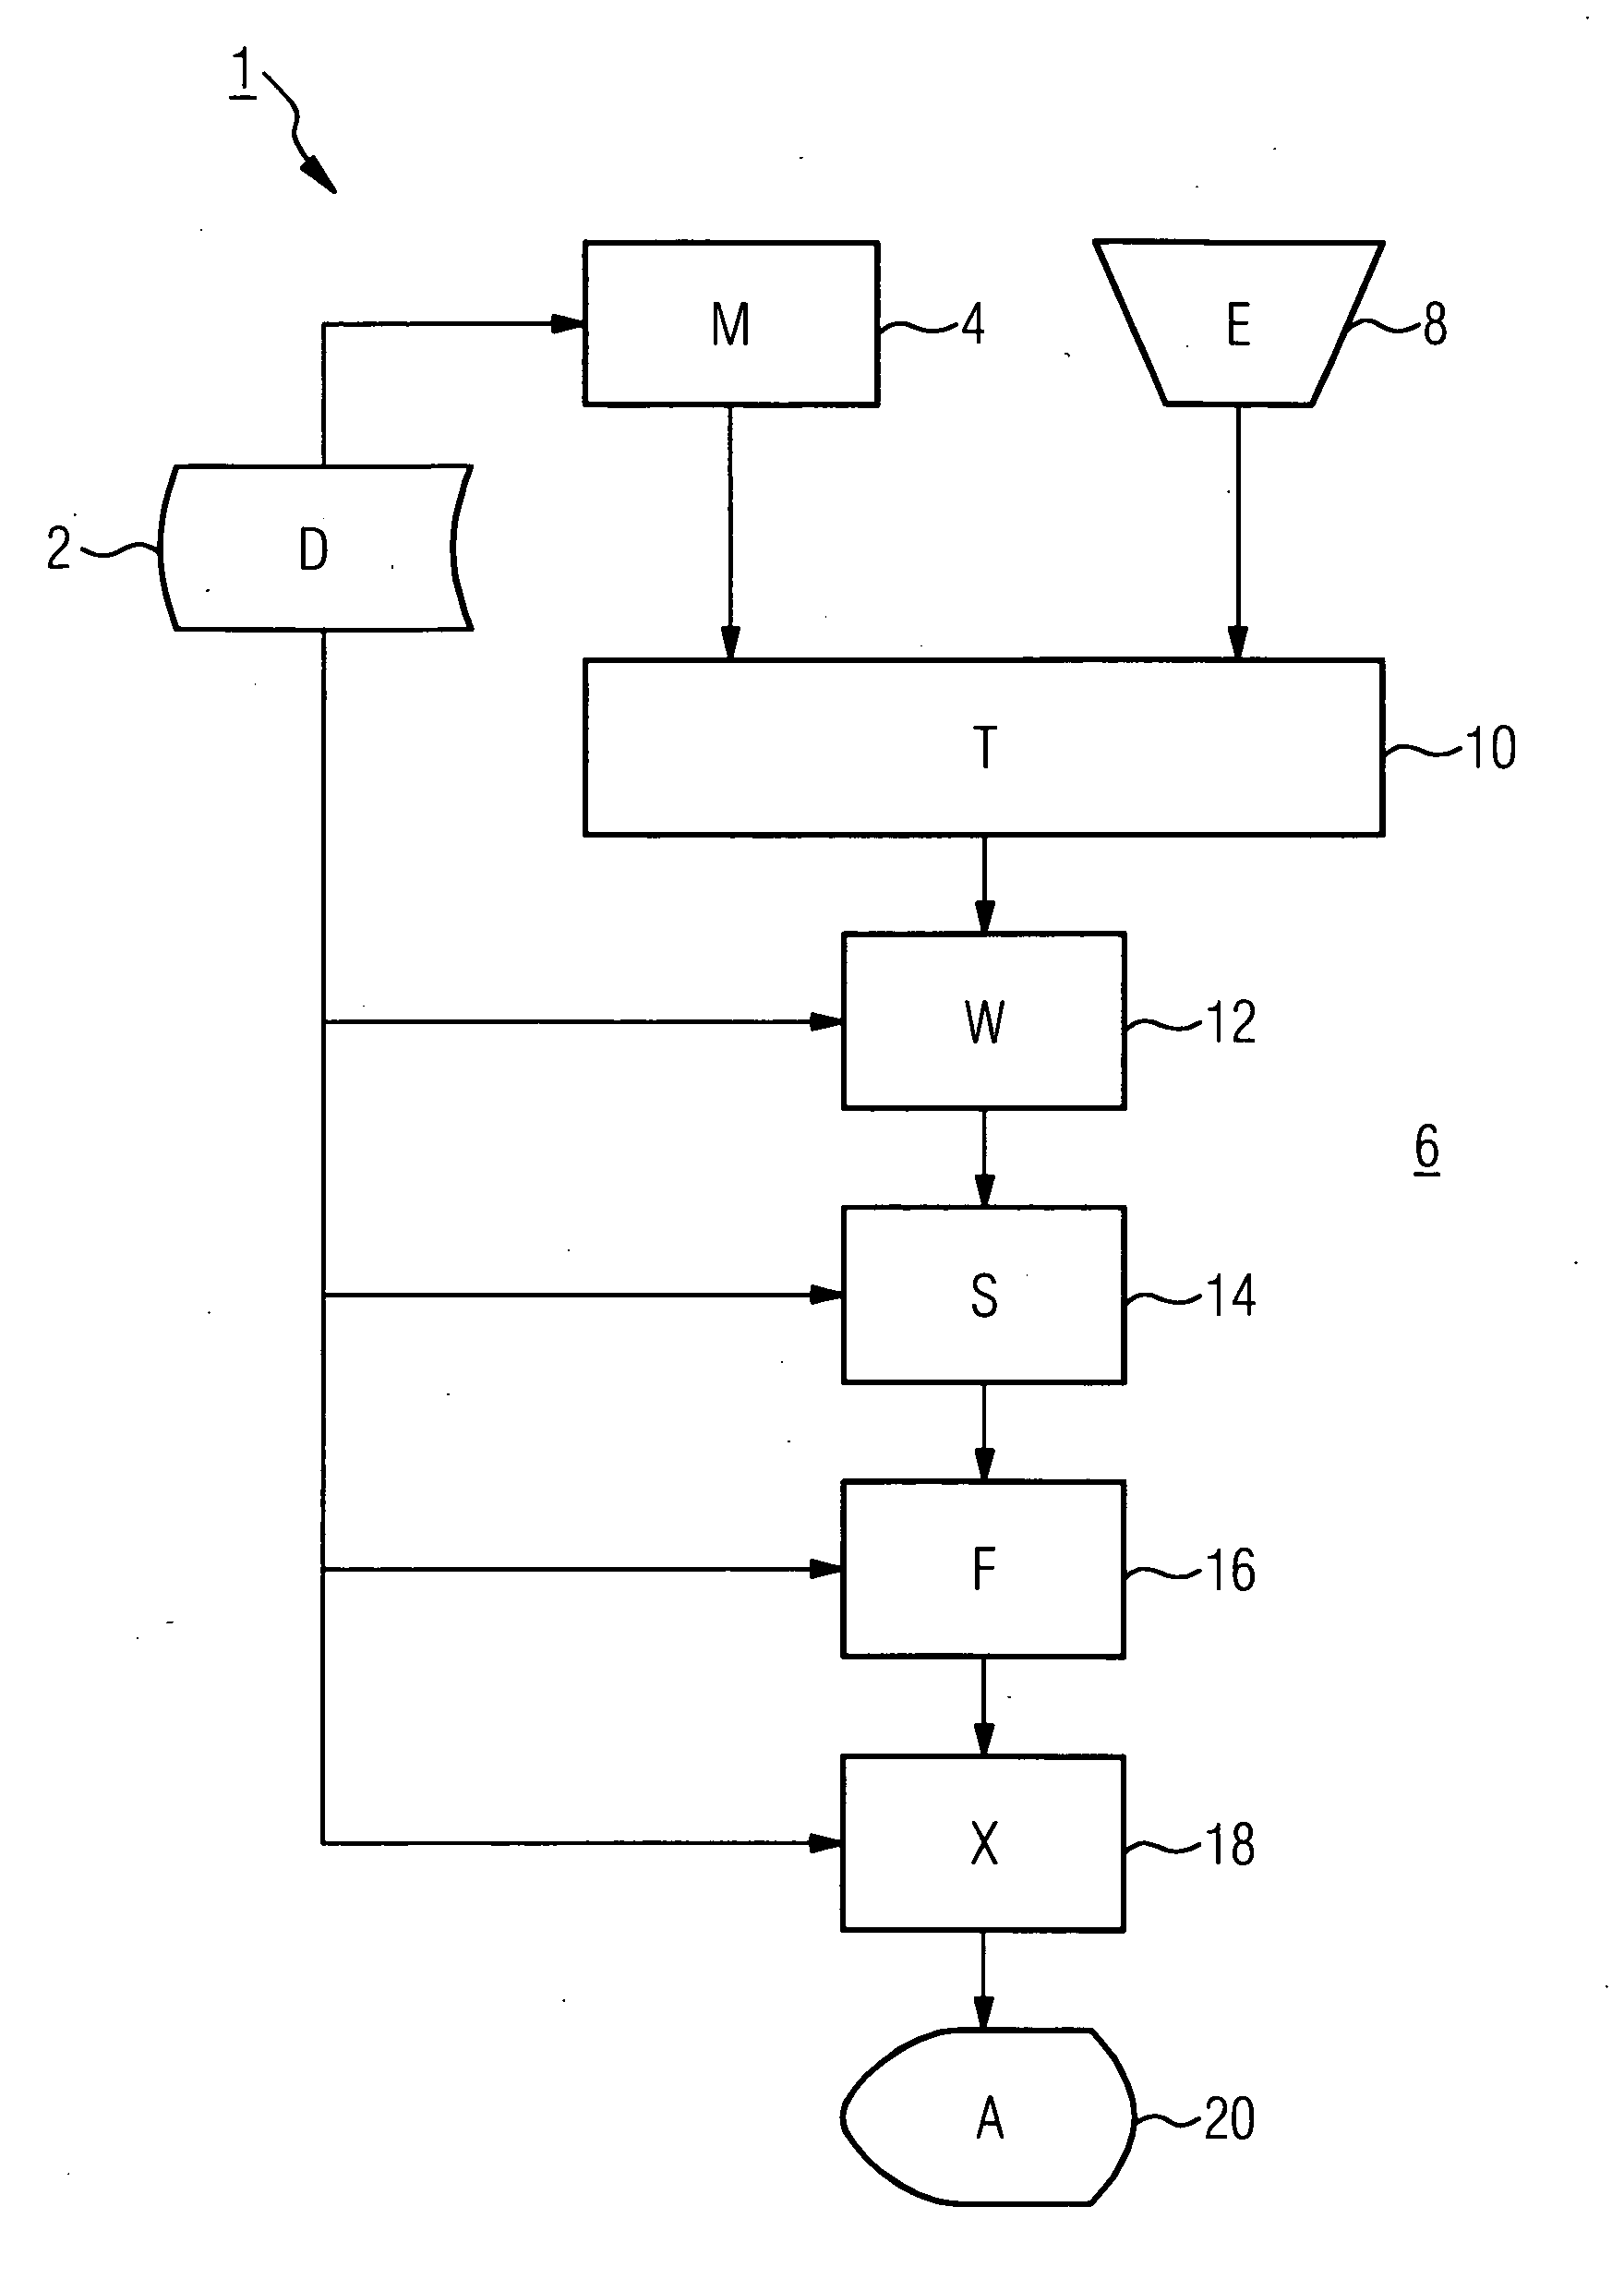 Method for operating an industrial scale installation and guidance system for same